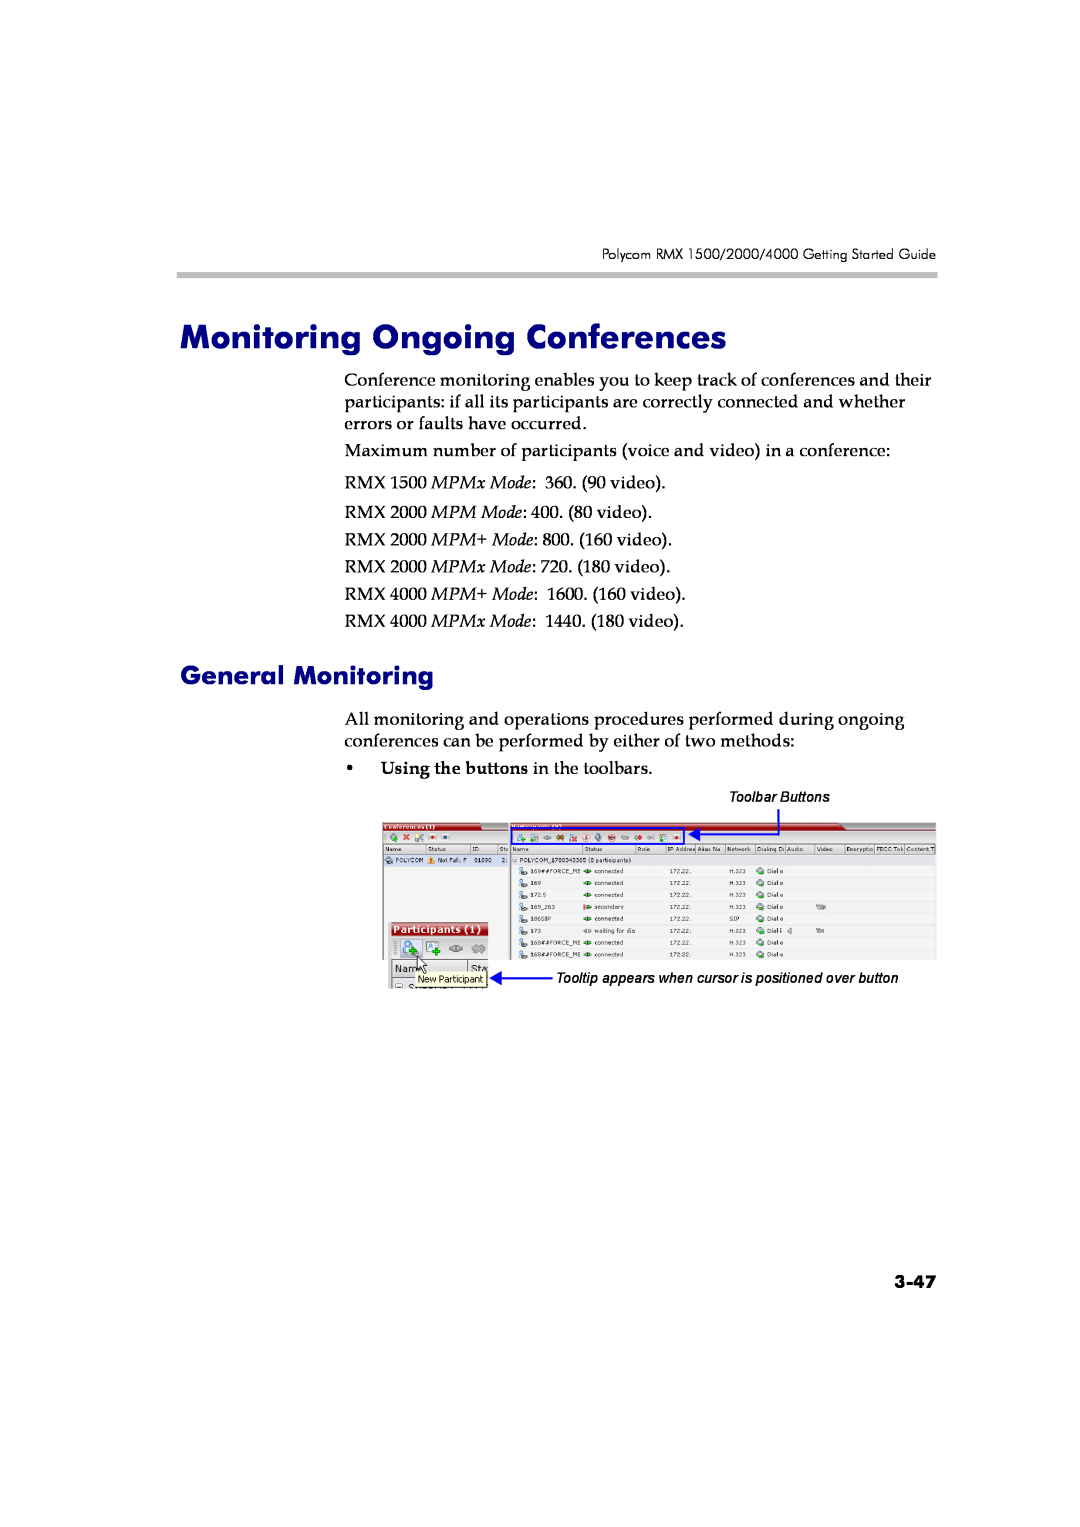 Polycom DOC2560B manual Monitoring Ongoing Conferences, General Monitoring, Using the buttons in the toolbars, 3-47 